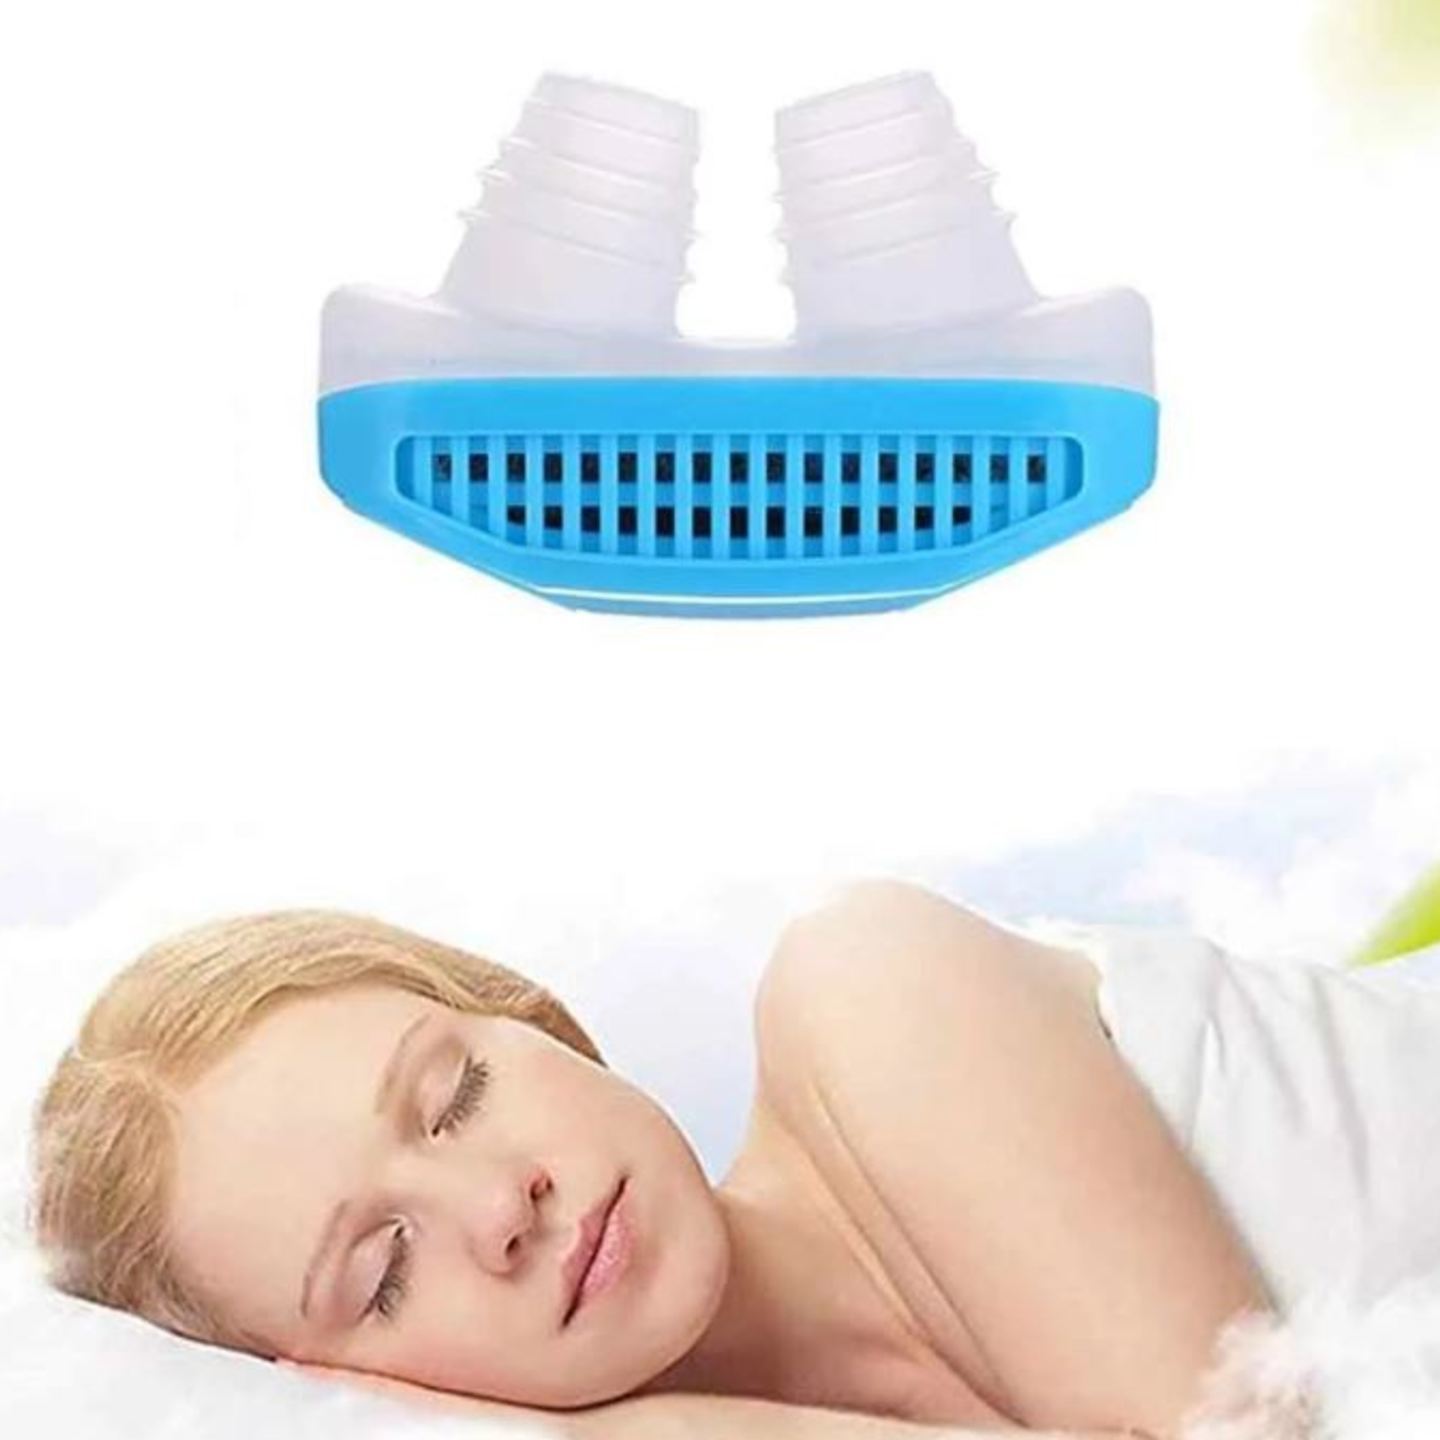 2 in 1 Anti Snoring and Air Purifier Nose Clip for Prevent Snoring and Comfortable Sleep